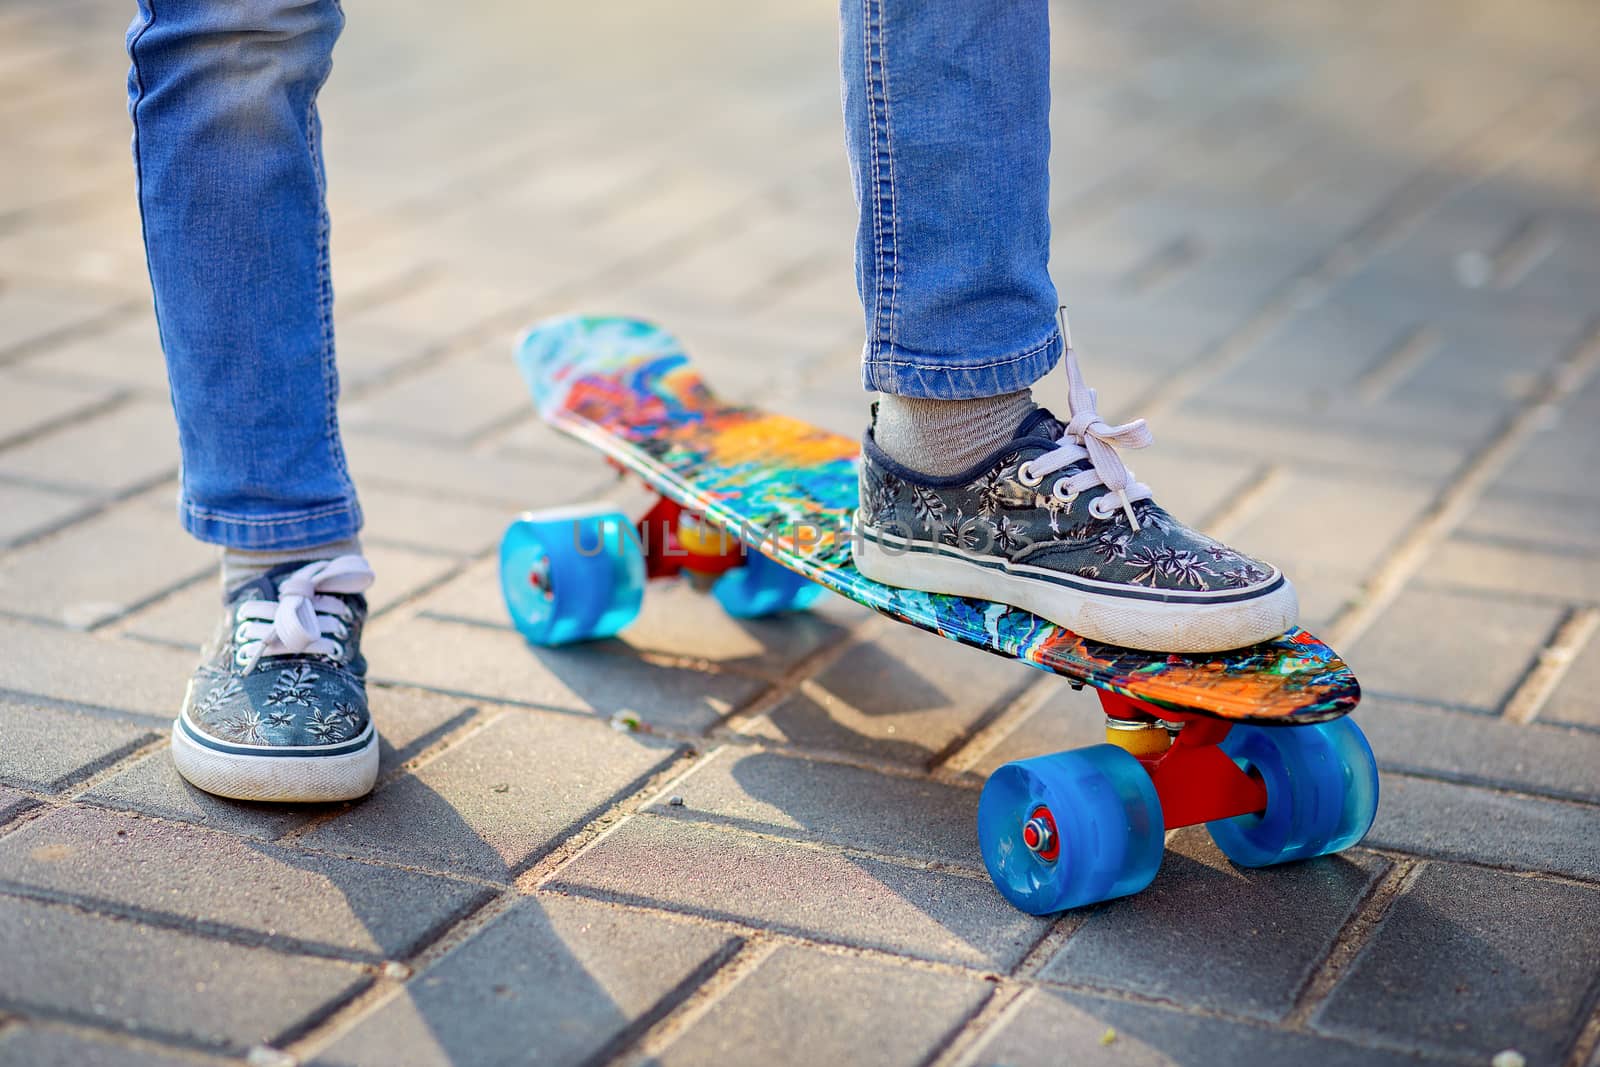 Children's feet in sneakers close-up on a skateboard. Children play sports. Physical development of children.